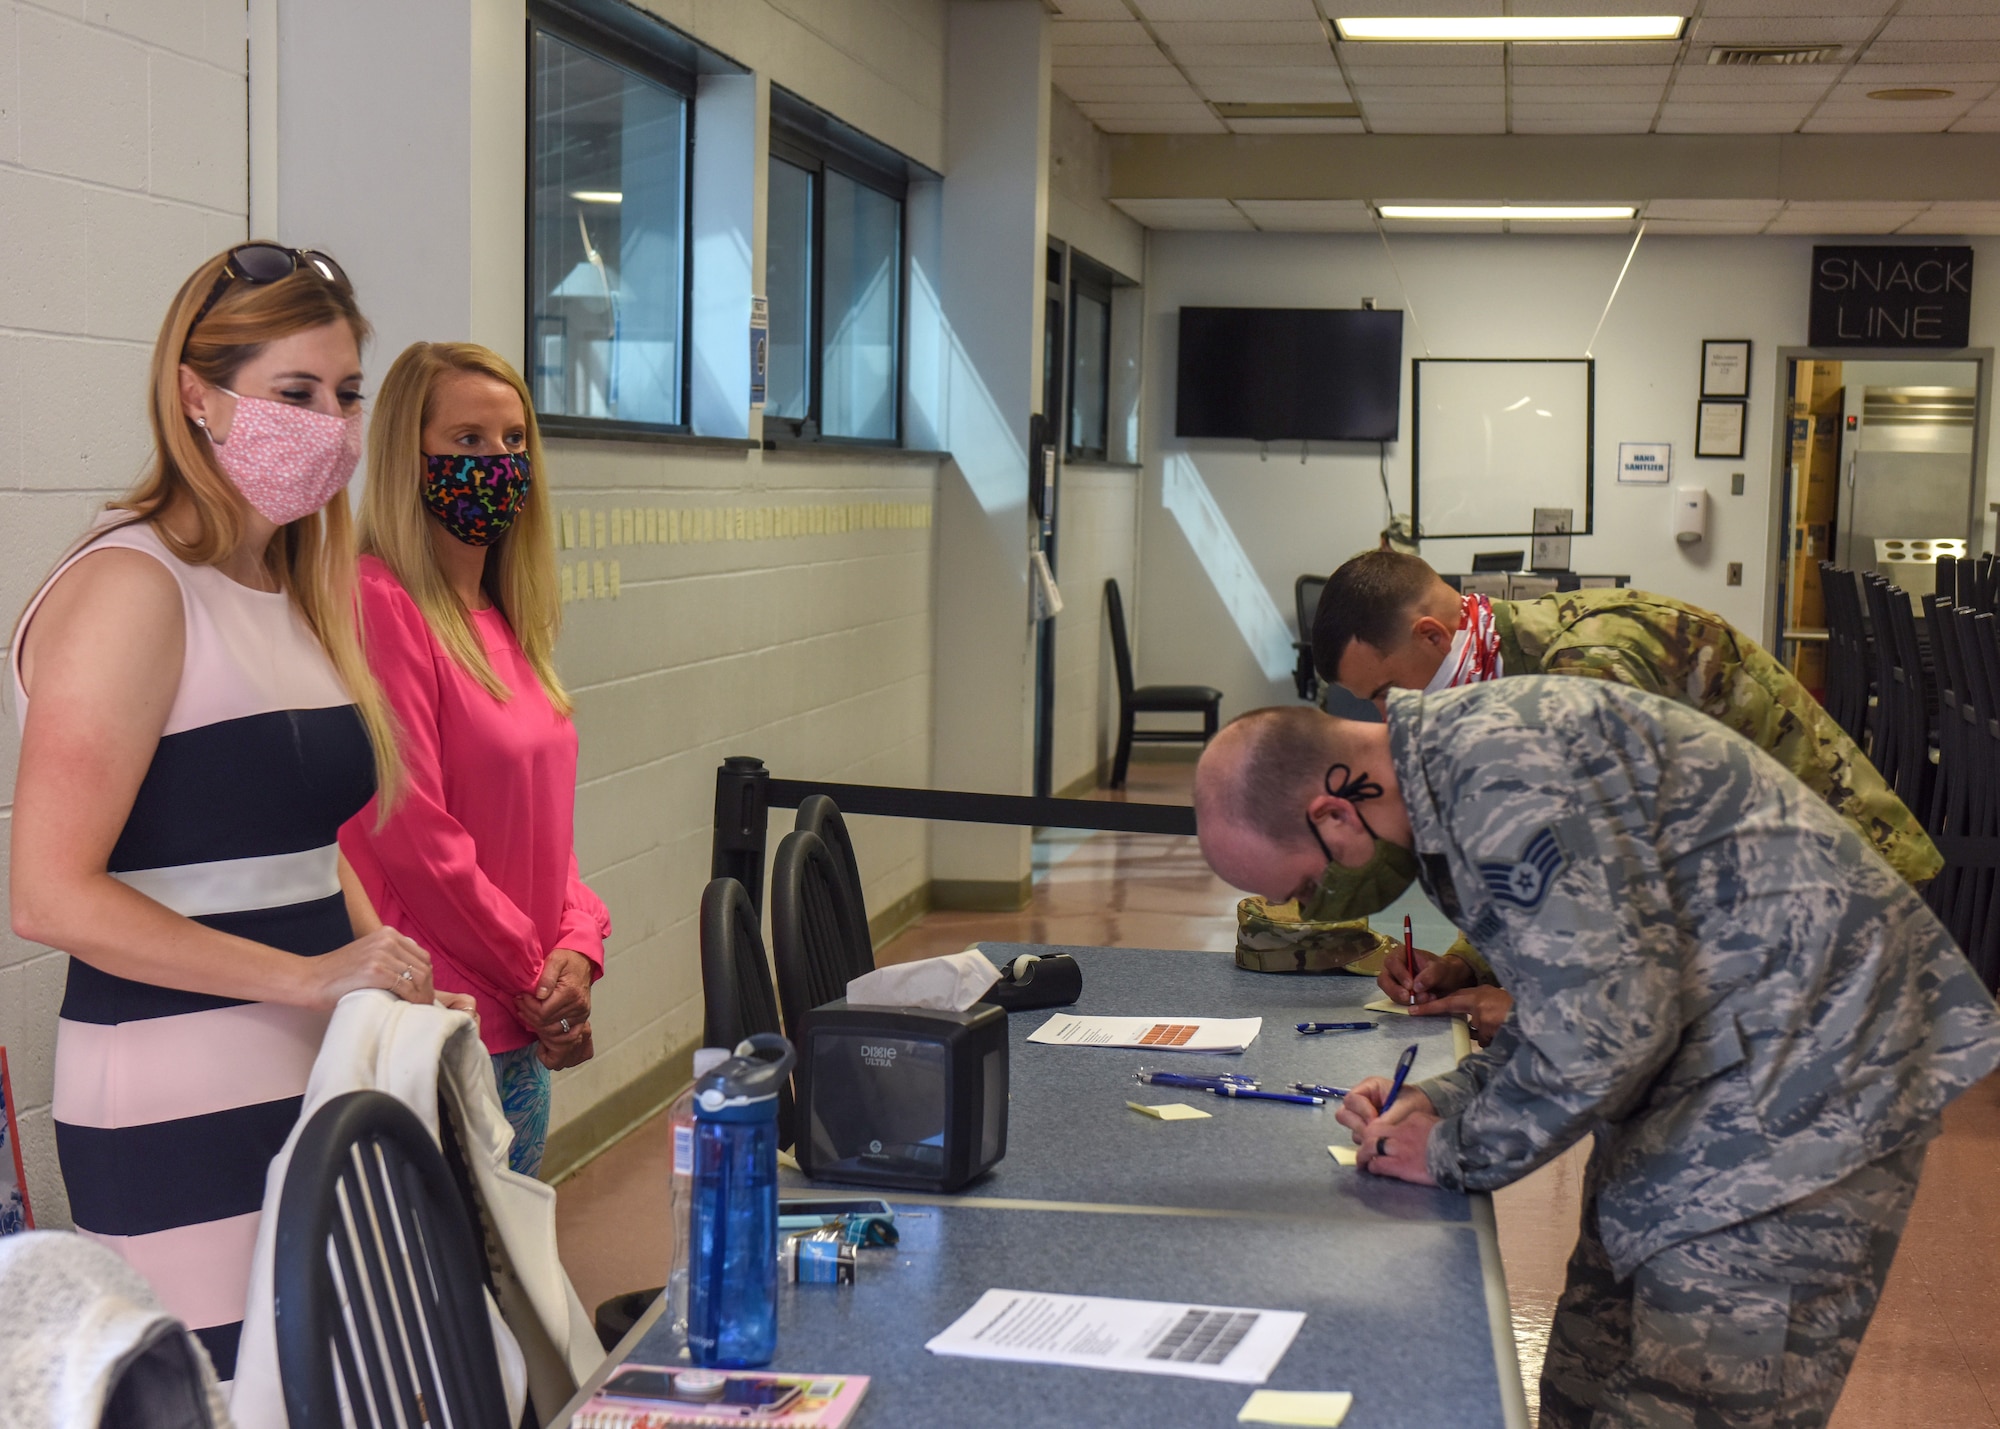 Jolene Richardson (left) and A.J. Byerly (right), both directors of psychological health for the 193rd Special Operations Wing, encourage Airmen to write supportive notes during a suicide prevention month activity at the wing dining facility Sept. 19, 2020. The handwritten notes were placed on the wall to demonstrate building a wall of support for fellow Airmen. (Air National Guard photo by Staff Sgt. Rachel Loftis/Released)